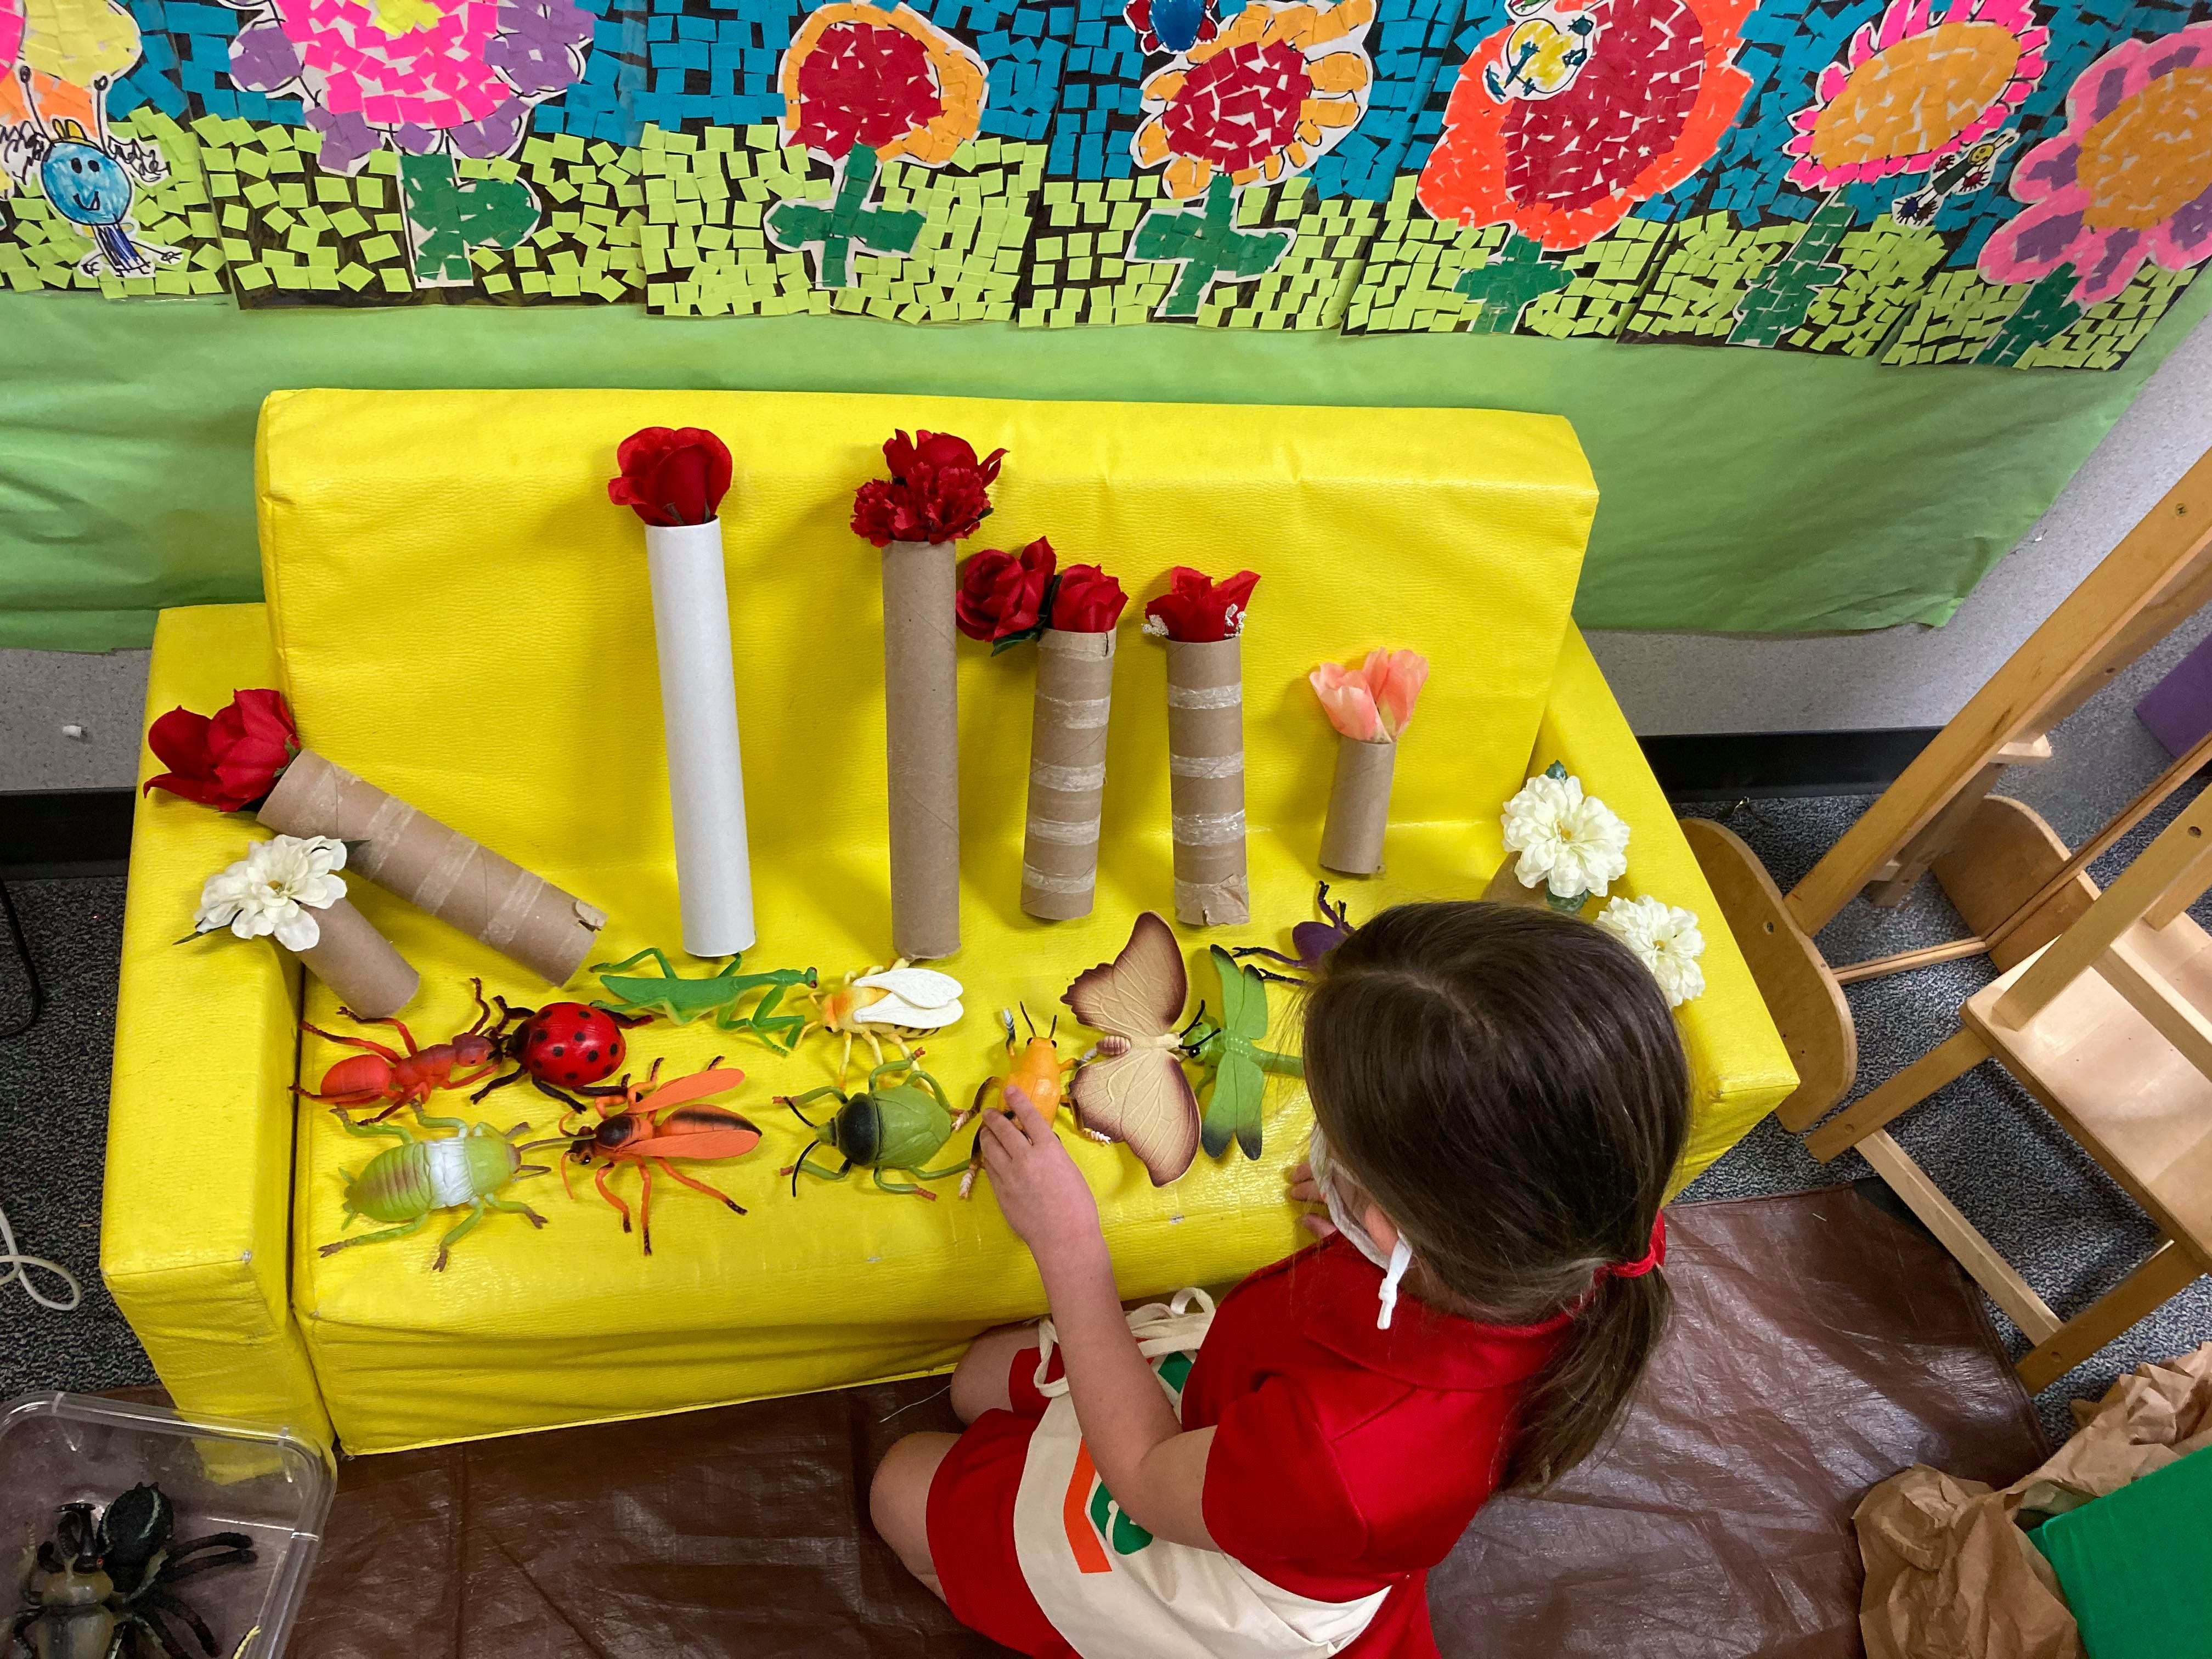 Students in Julia Lopez's pre-K Spanish immersion class at Charles M. Burkey Elementary learn while playing in centers that follow different themes throughout the year. As part of the spring theme, students are sorting giant bugs and creating flower bouquets for their parents.